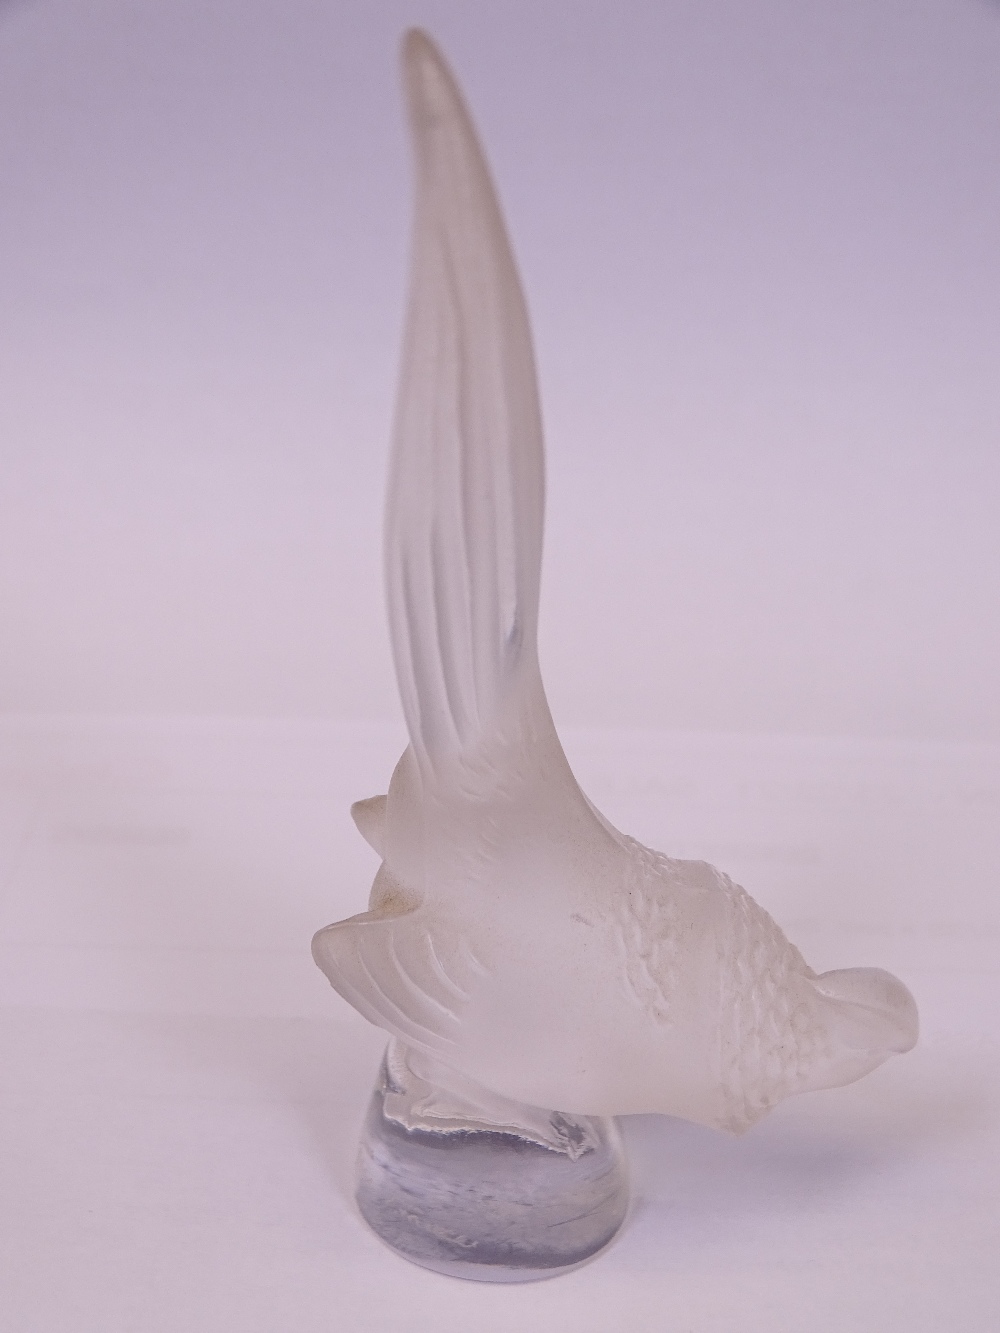 LALIQUE FROSTED GLASS PHEASANT with engraved signature 'Lalique France' to the back, 9cms H - Image 2 of 5